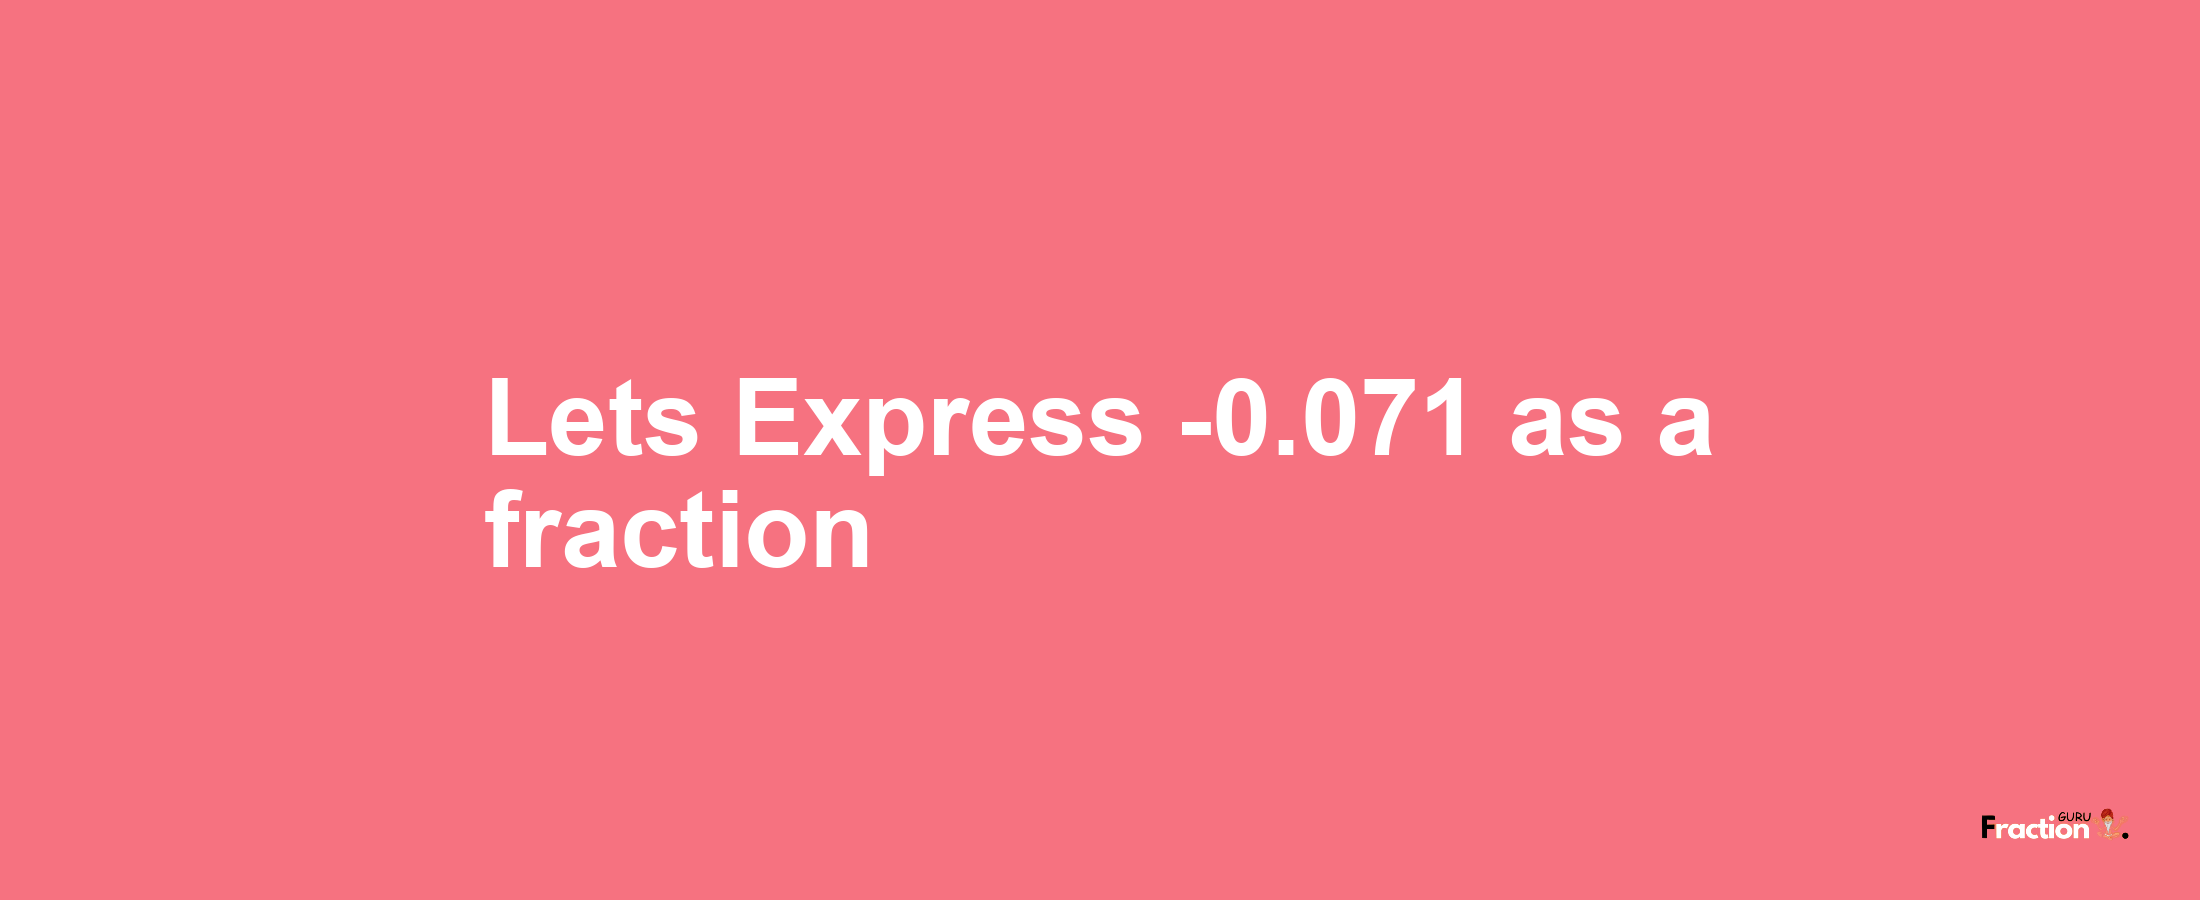 Lets Express -0.071 as afraction